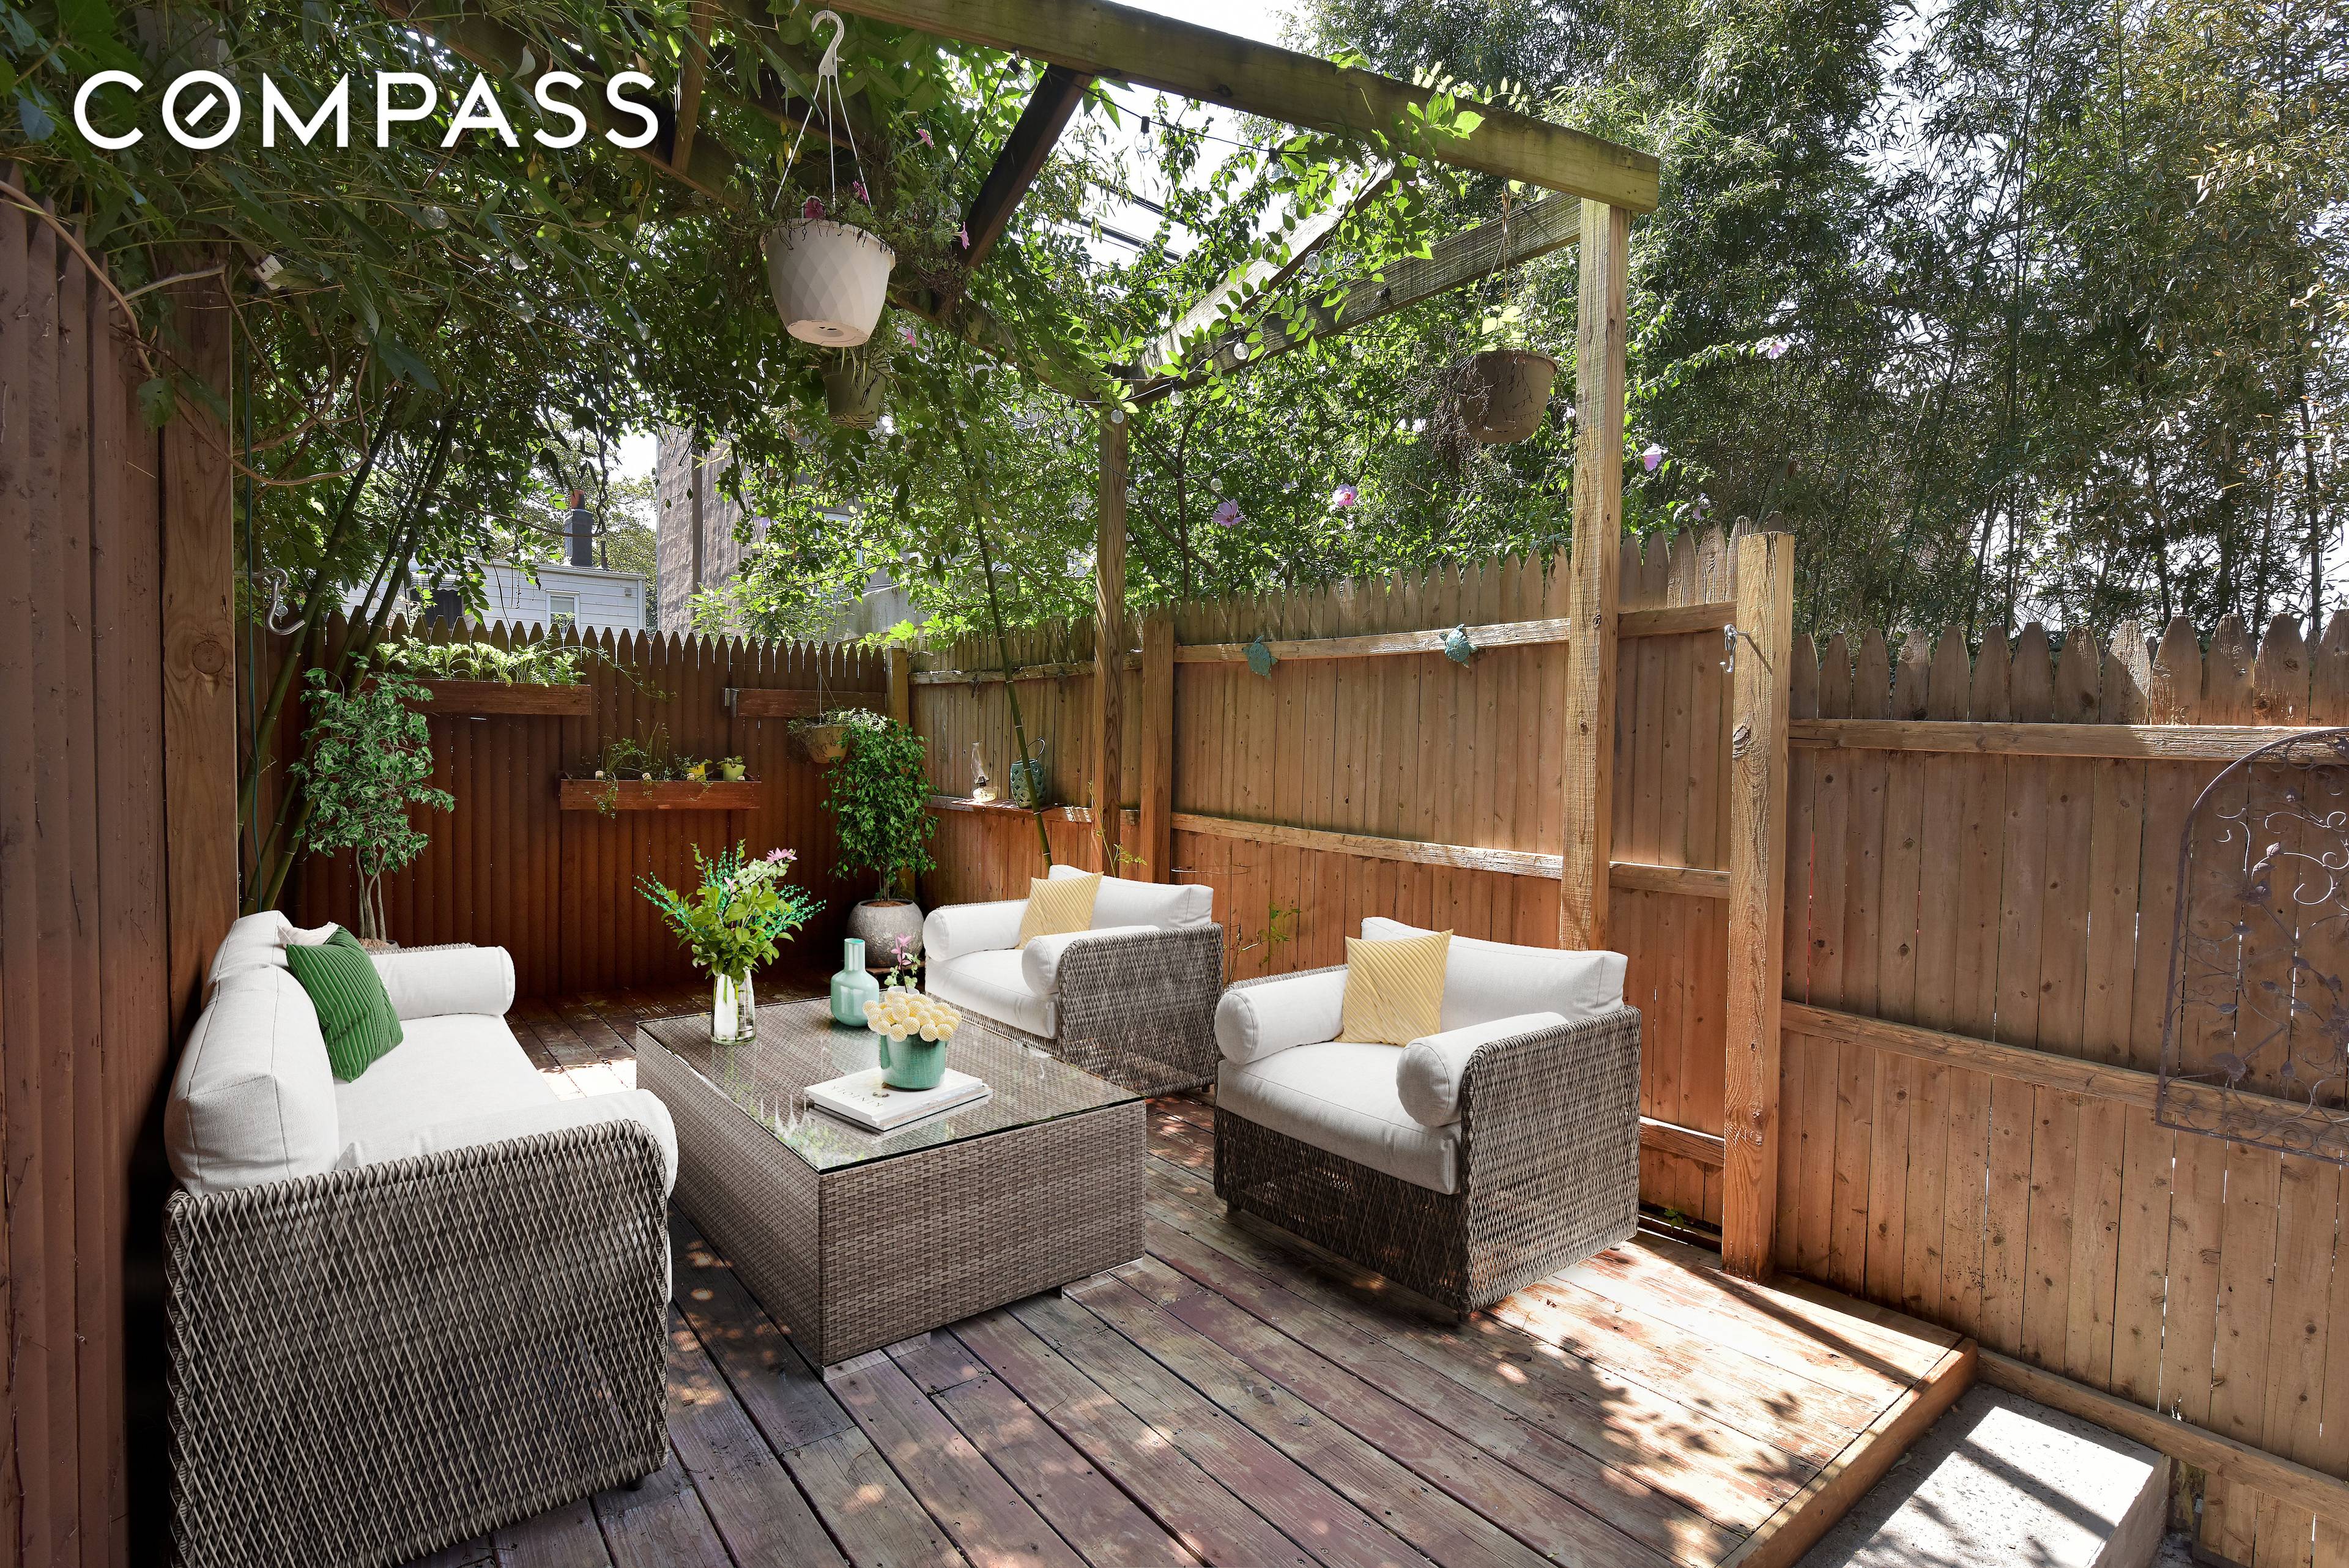 At nearly 1100 interior square feet, this South Slope Greenwood duplex features its own little slice of paradise in the form of a large dual level outdoor space.